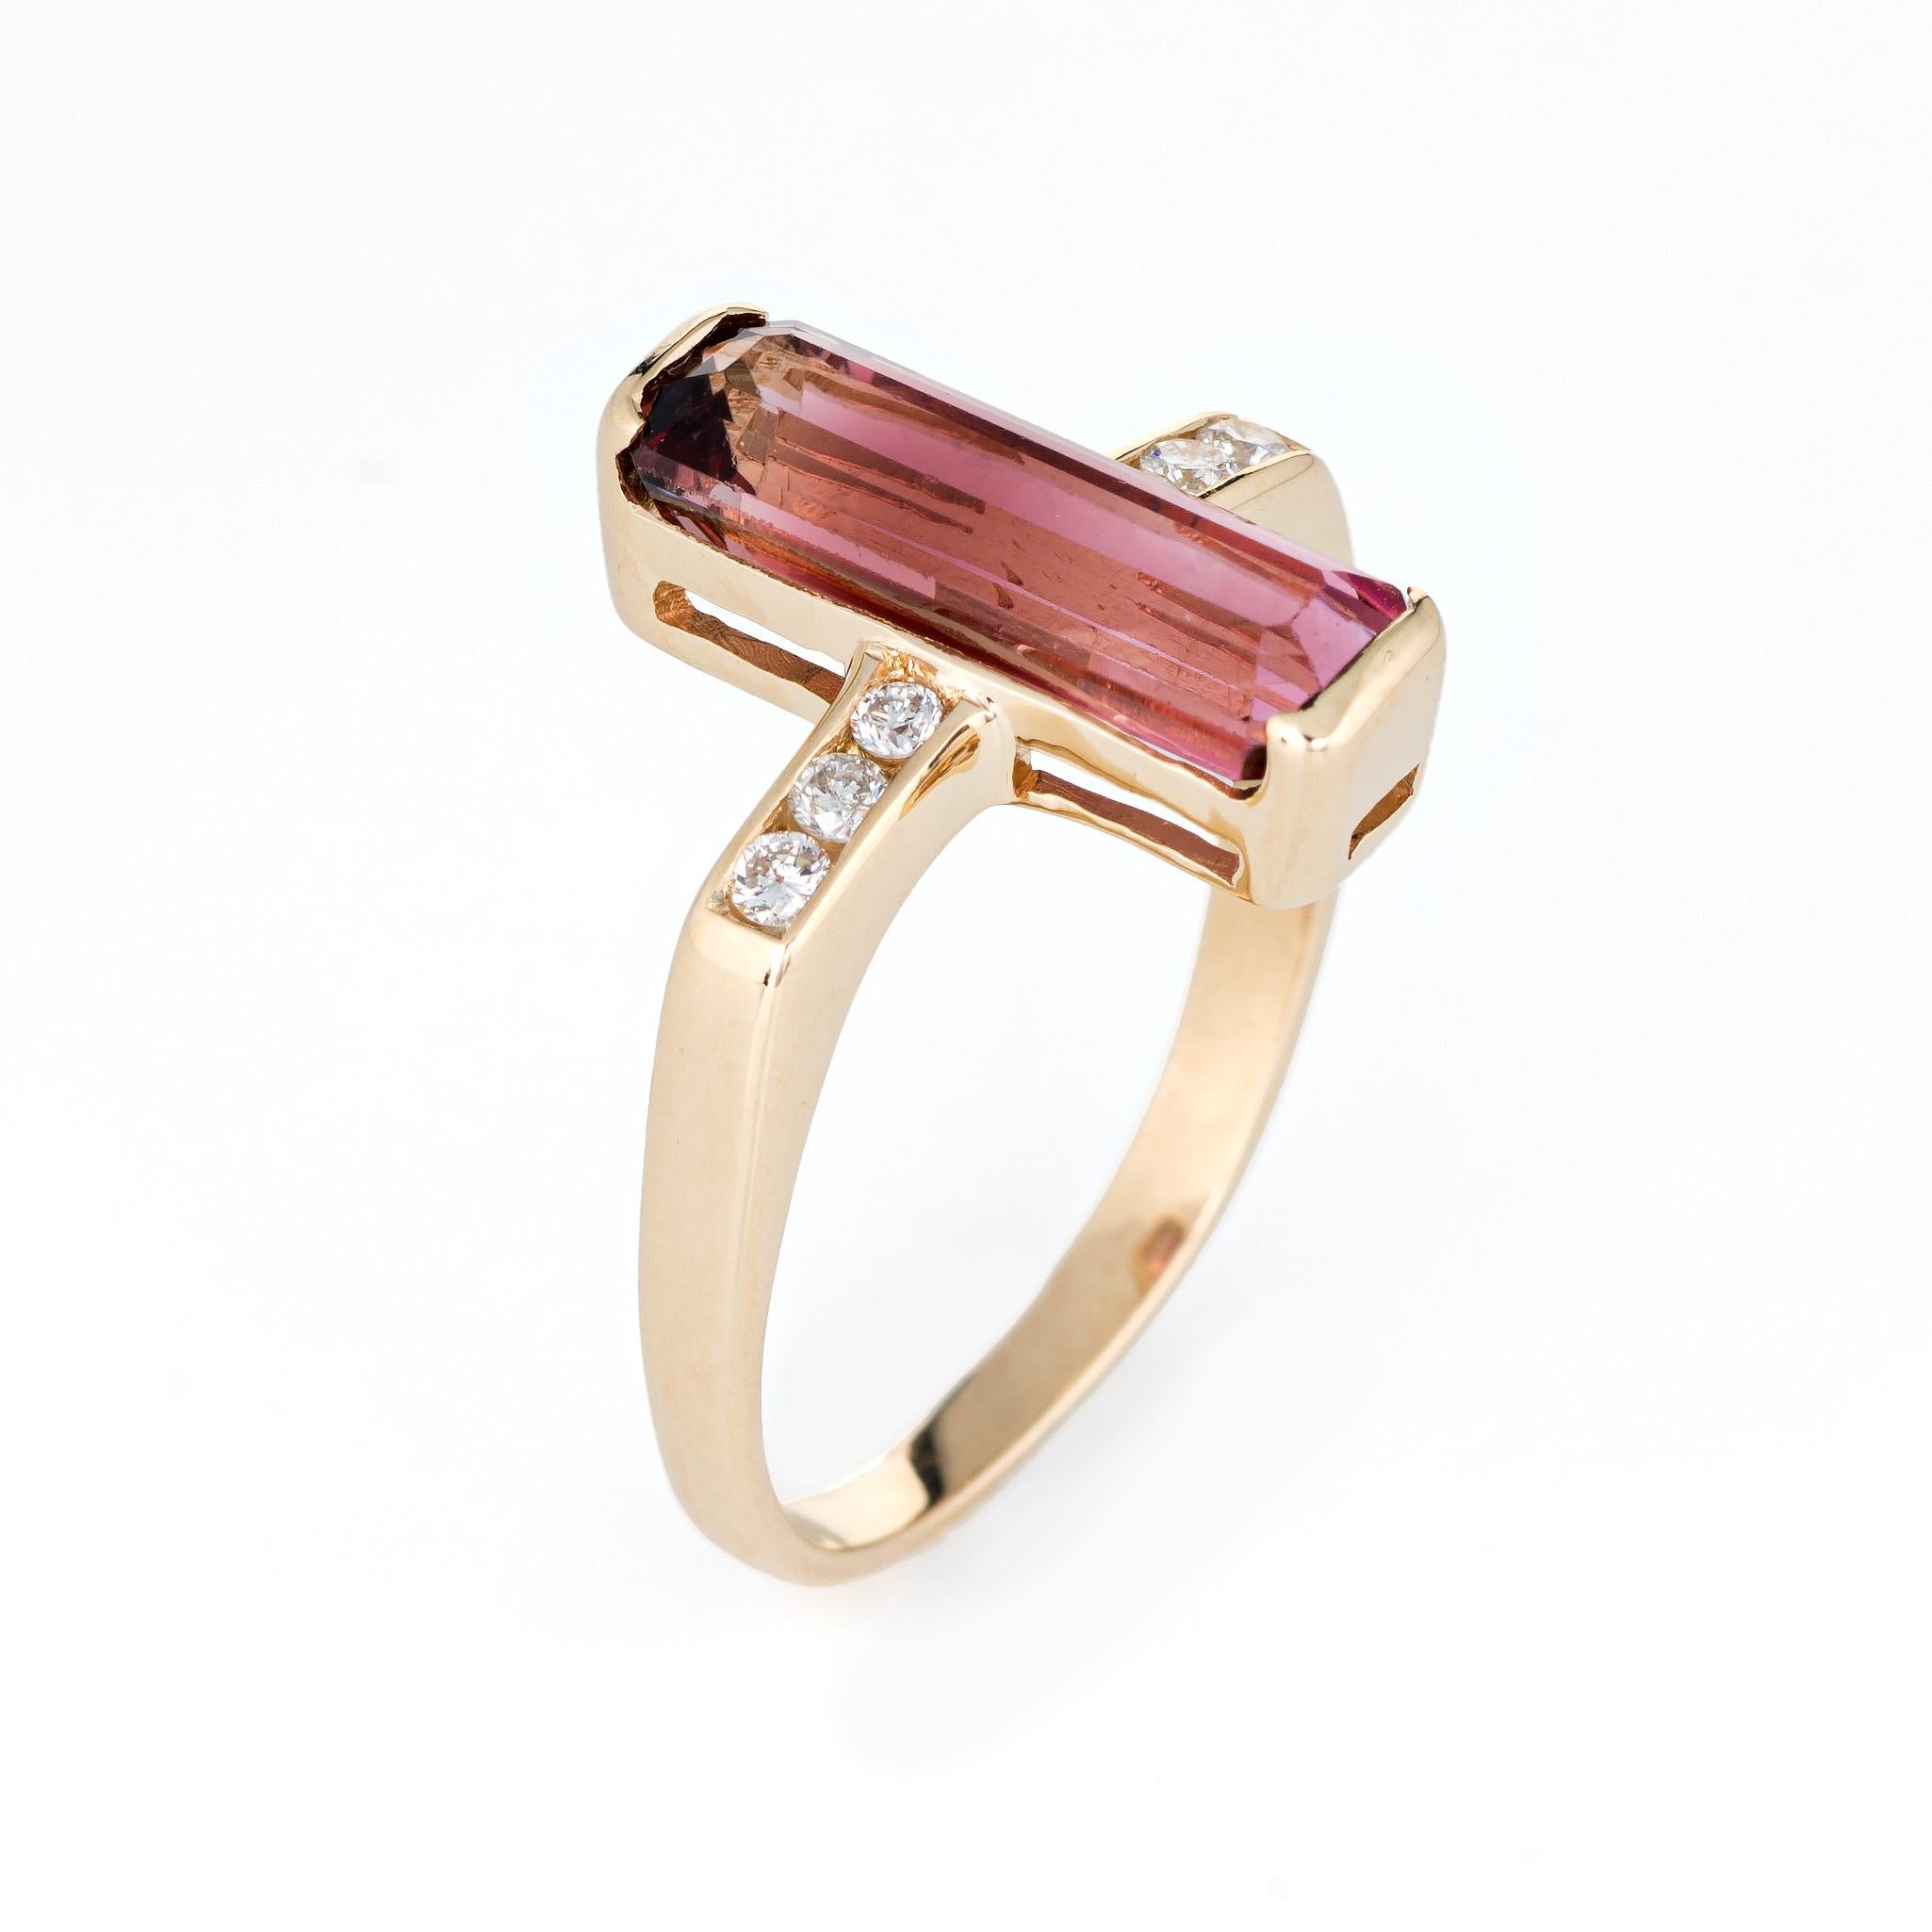 Stylish elongated pink tourmaline & diamond ring crafted in 18 karat yellow gold. 

Pink tourmaline measures 14mm x 5mm (estimated at 3 carats) accented with an estimated 0.12 carats of diamonds (estimated at H-I color and SI2-I1 clarity). The